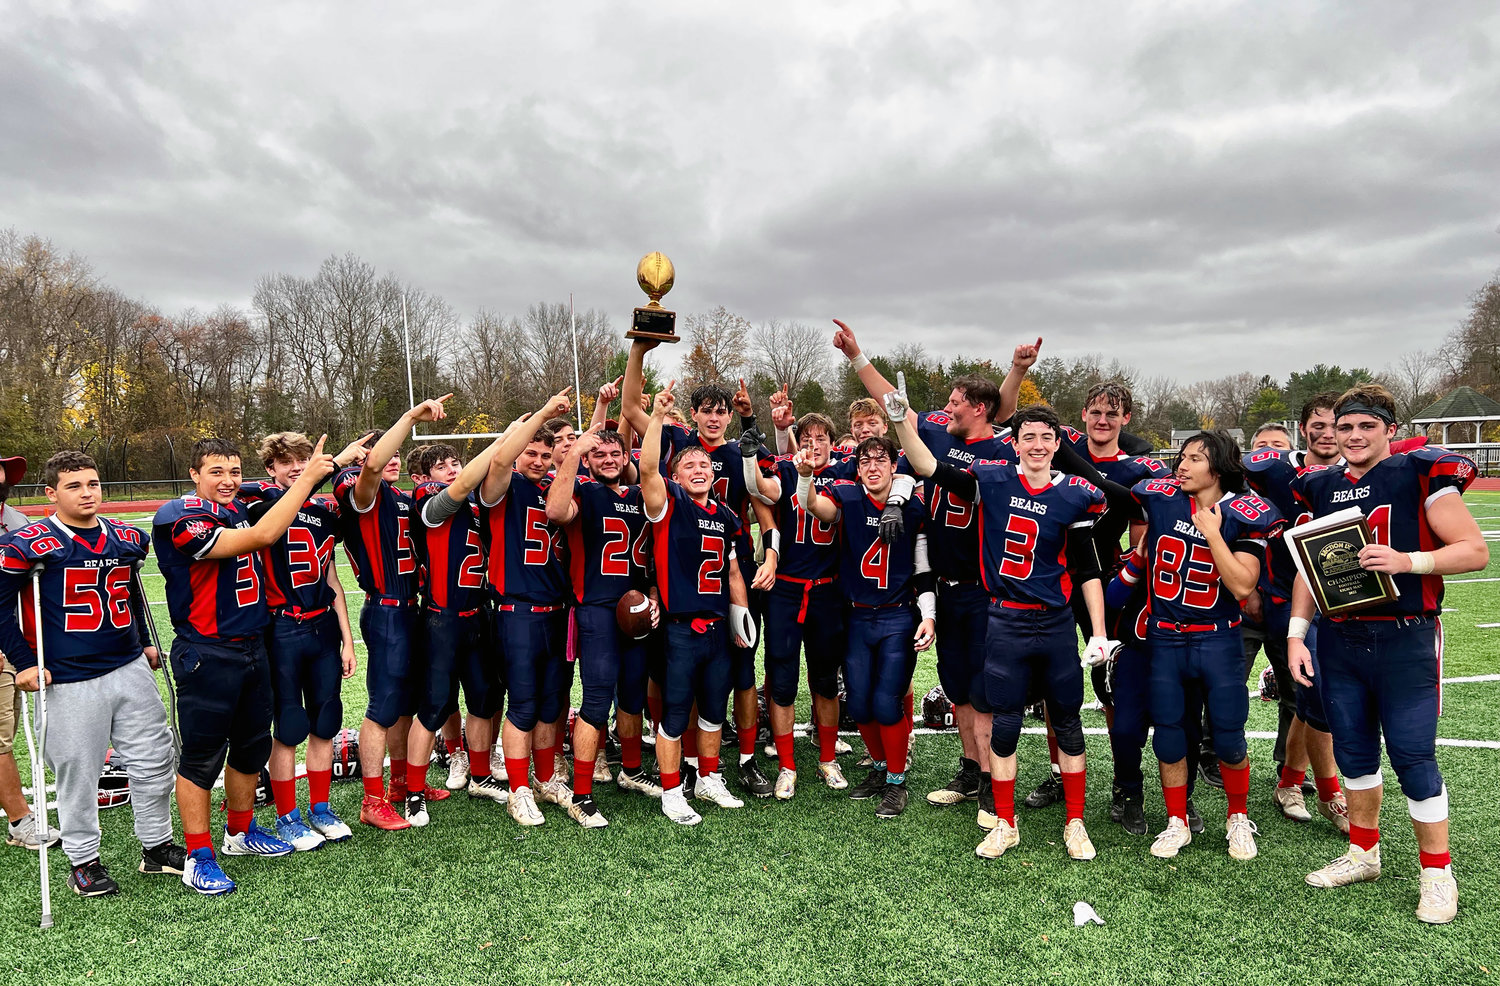 The victorious Bears hold the Fred Ahart trophy aloft in a moment of postgame exuberance.